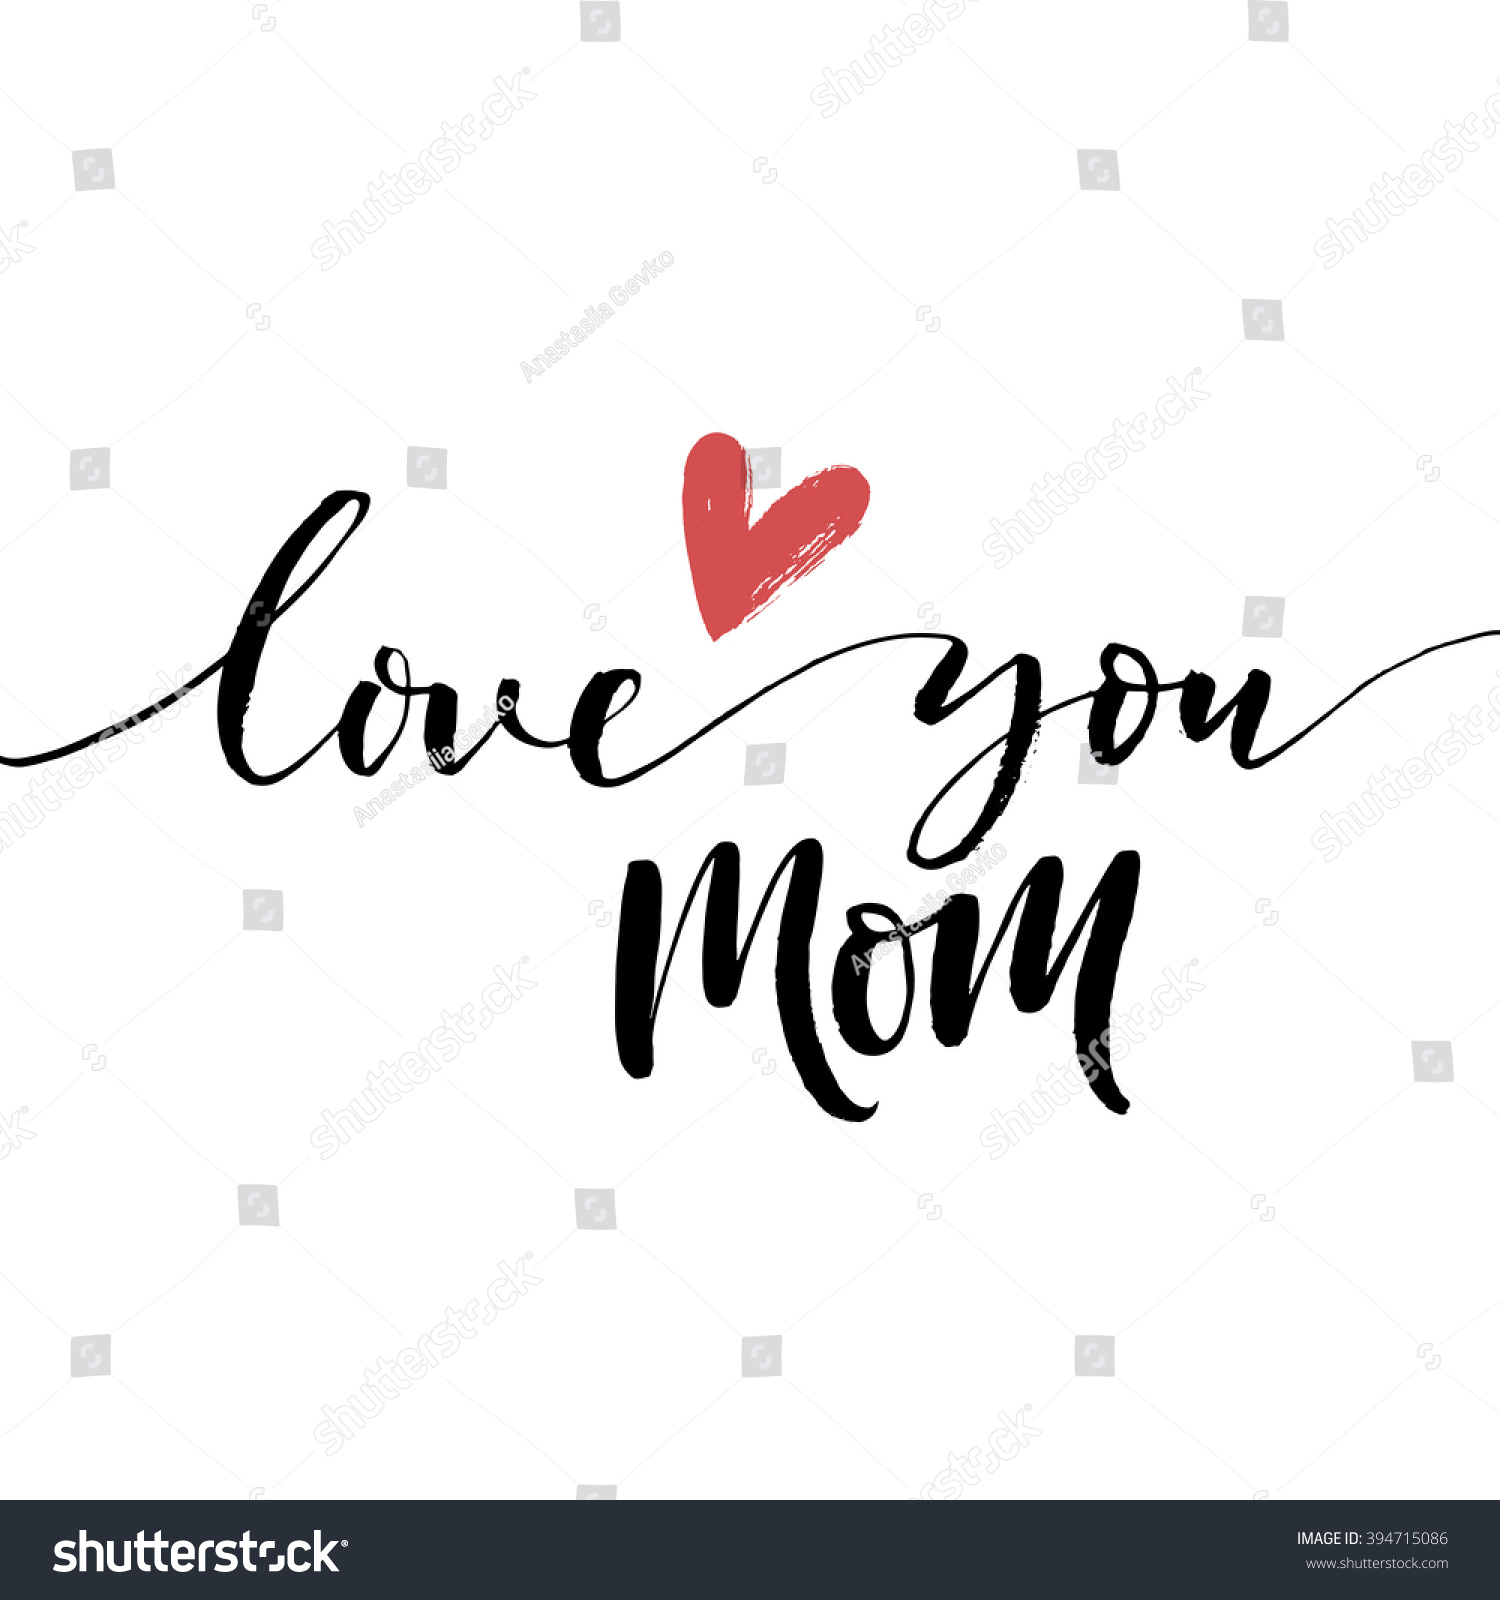 Love You Mom Card Hand Drawn Stock Vector Royalty Free